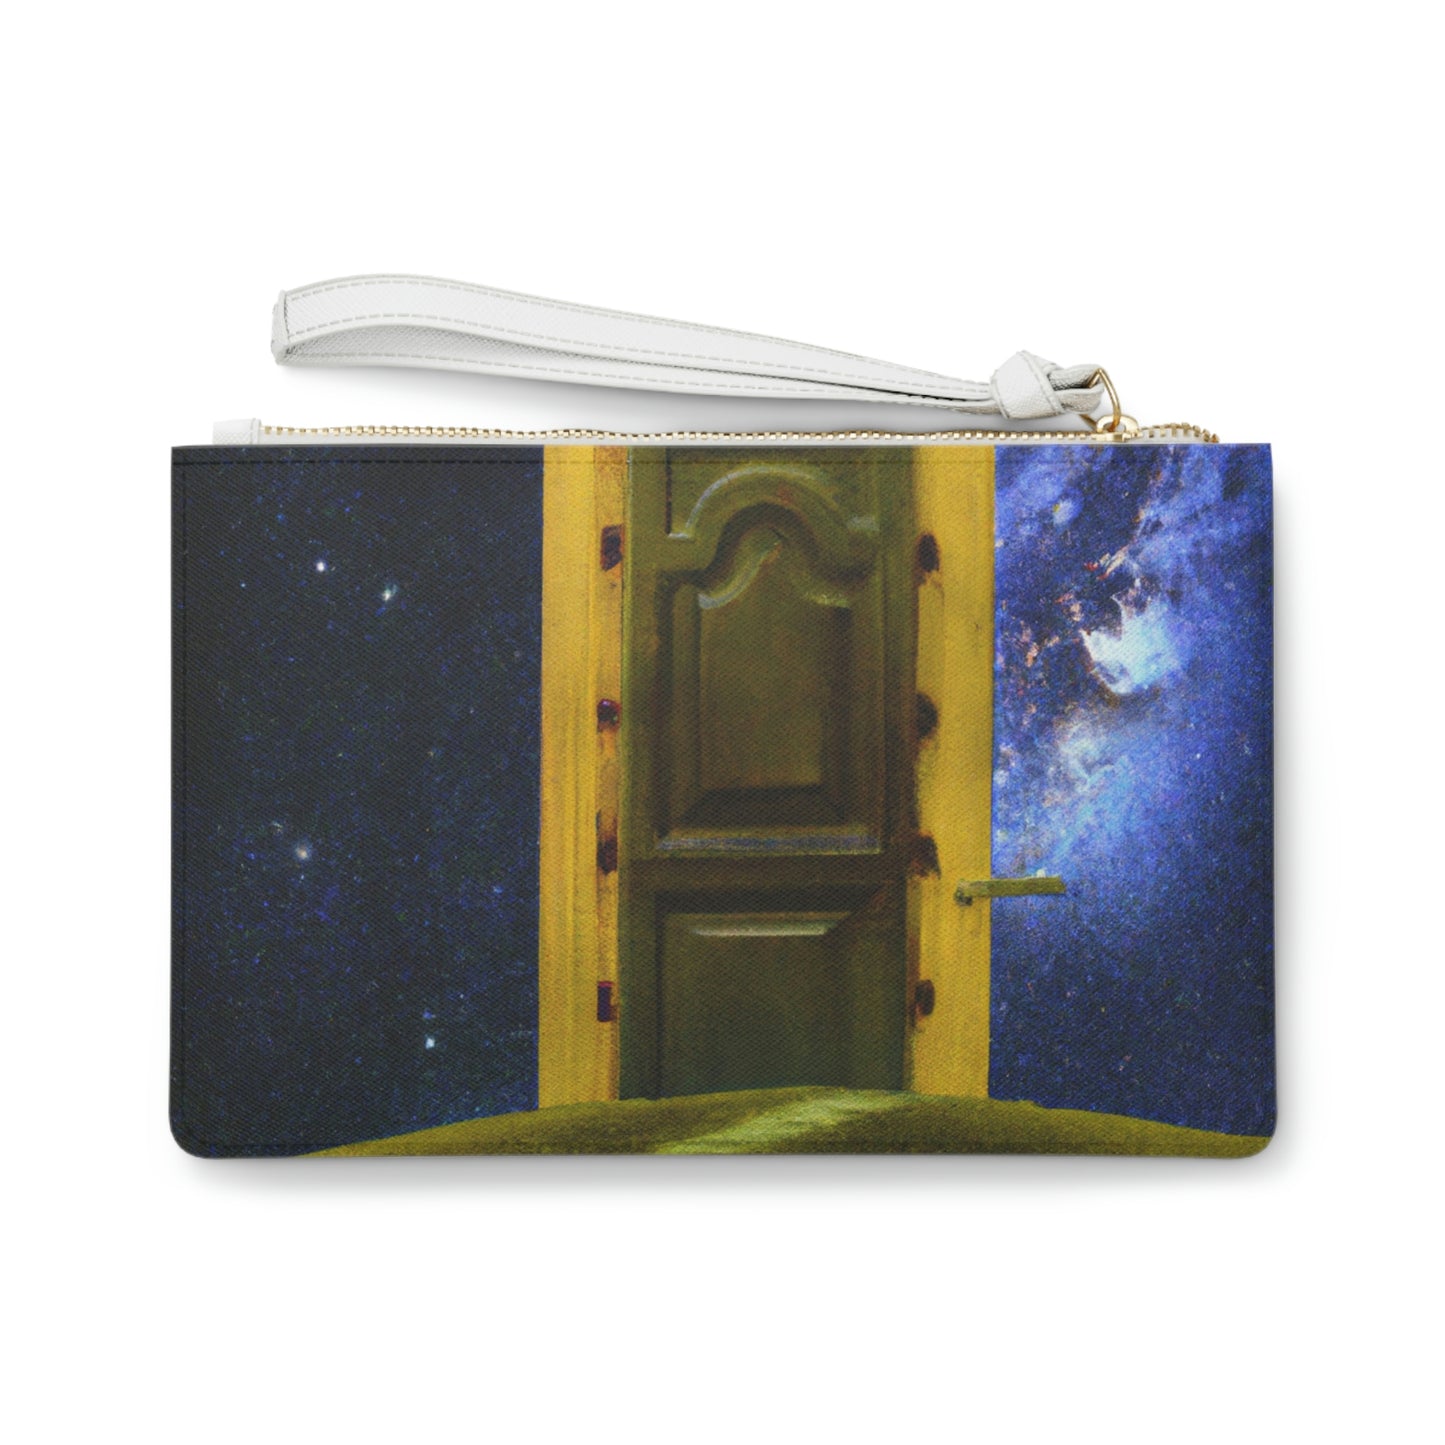 The Heavenly Threshold - The Alien Clutch Bag